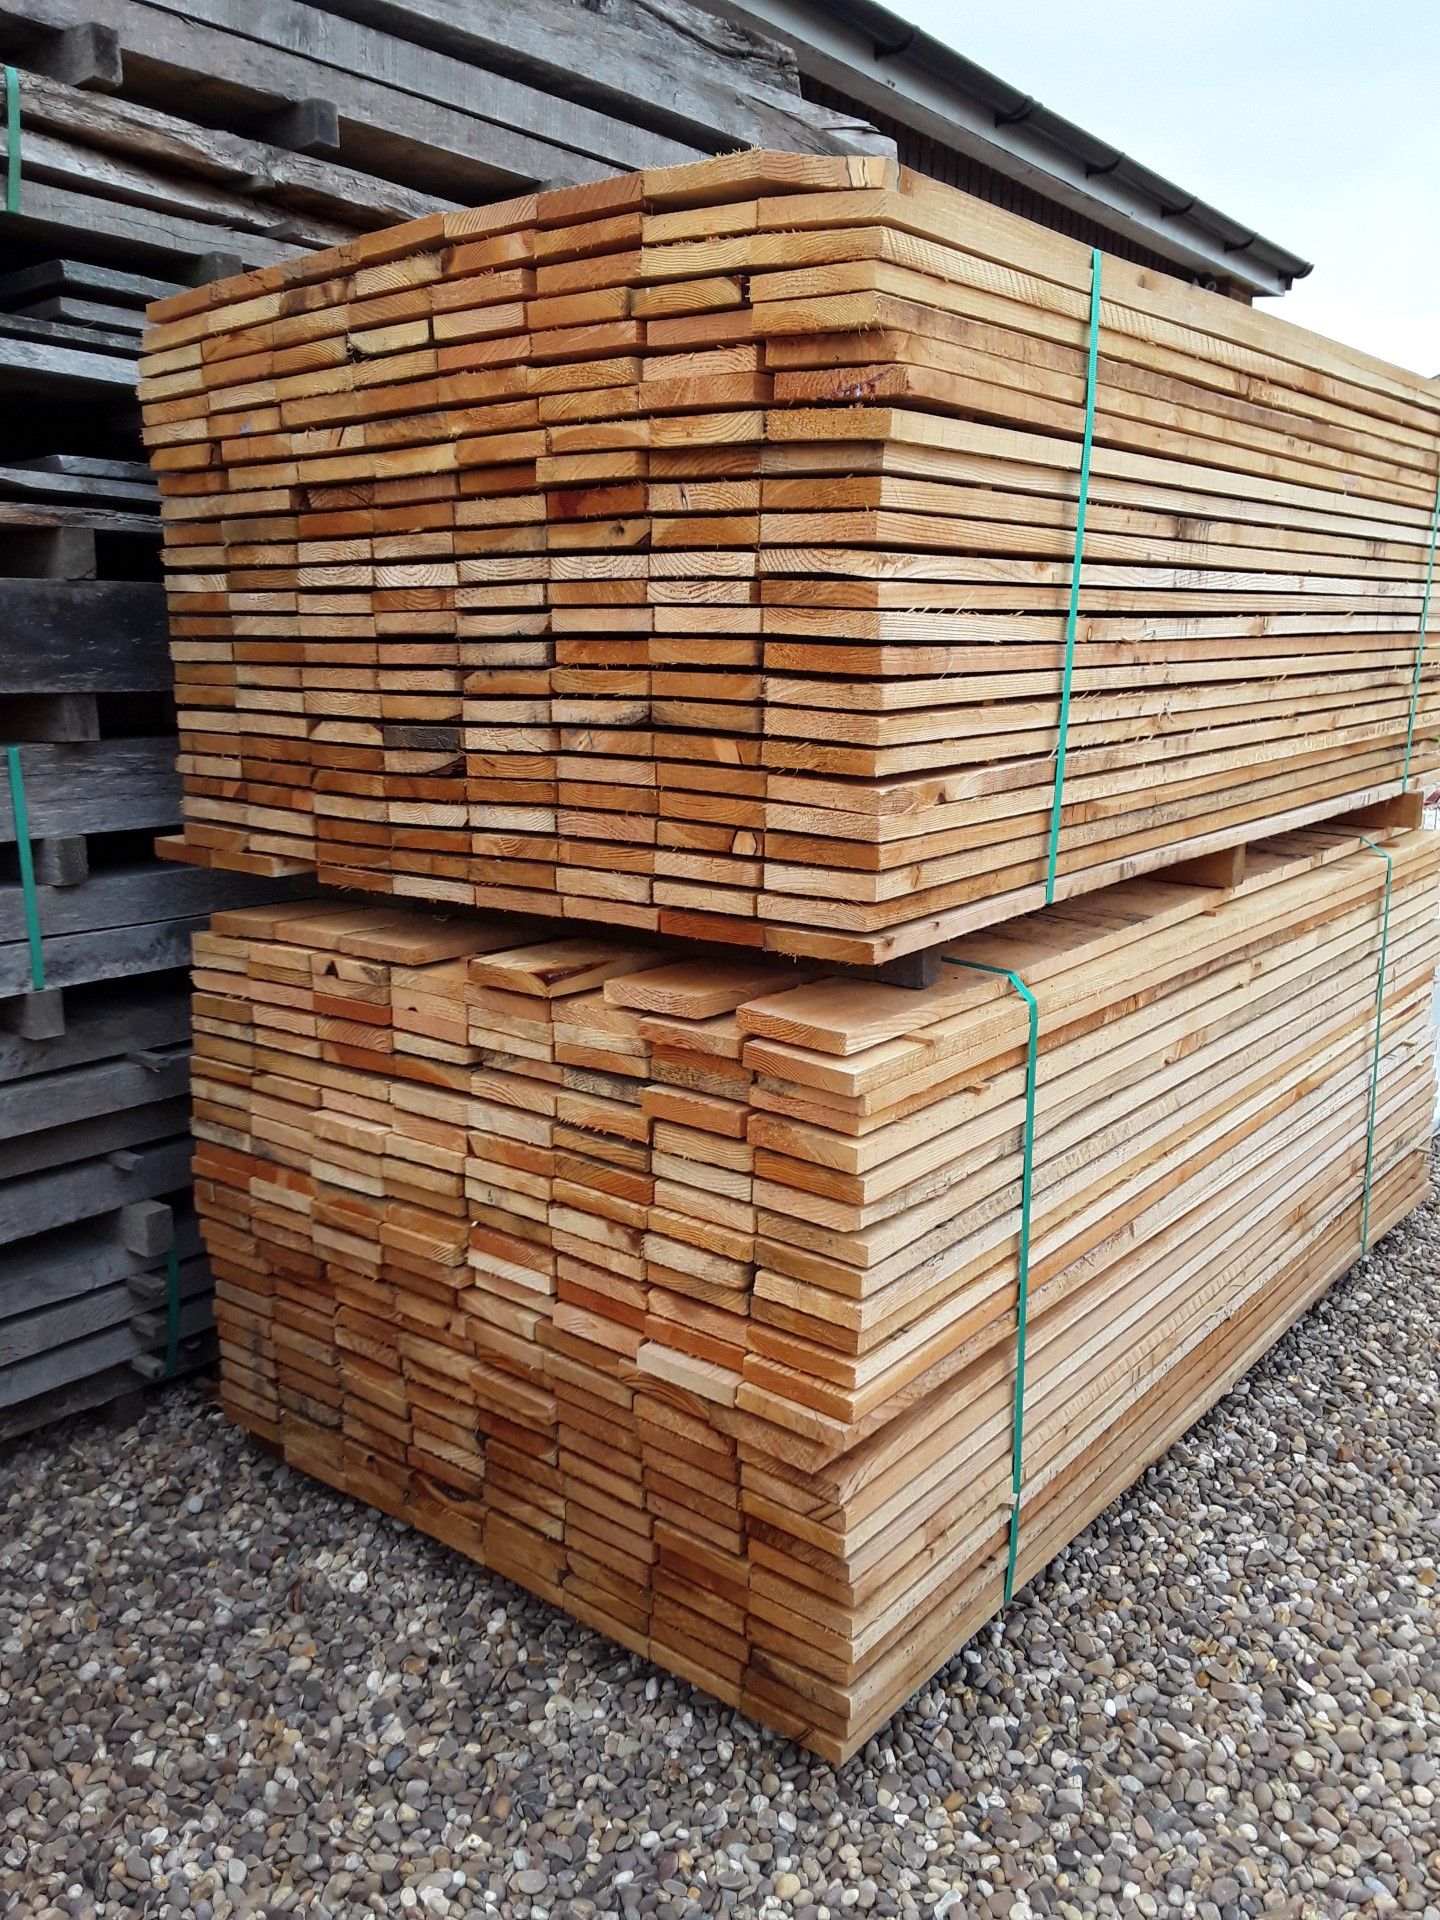 50x Softwood Sawn Timber Mixed Larch / Douglas Fir Boards - Image 6 of 6